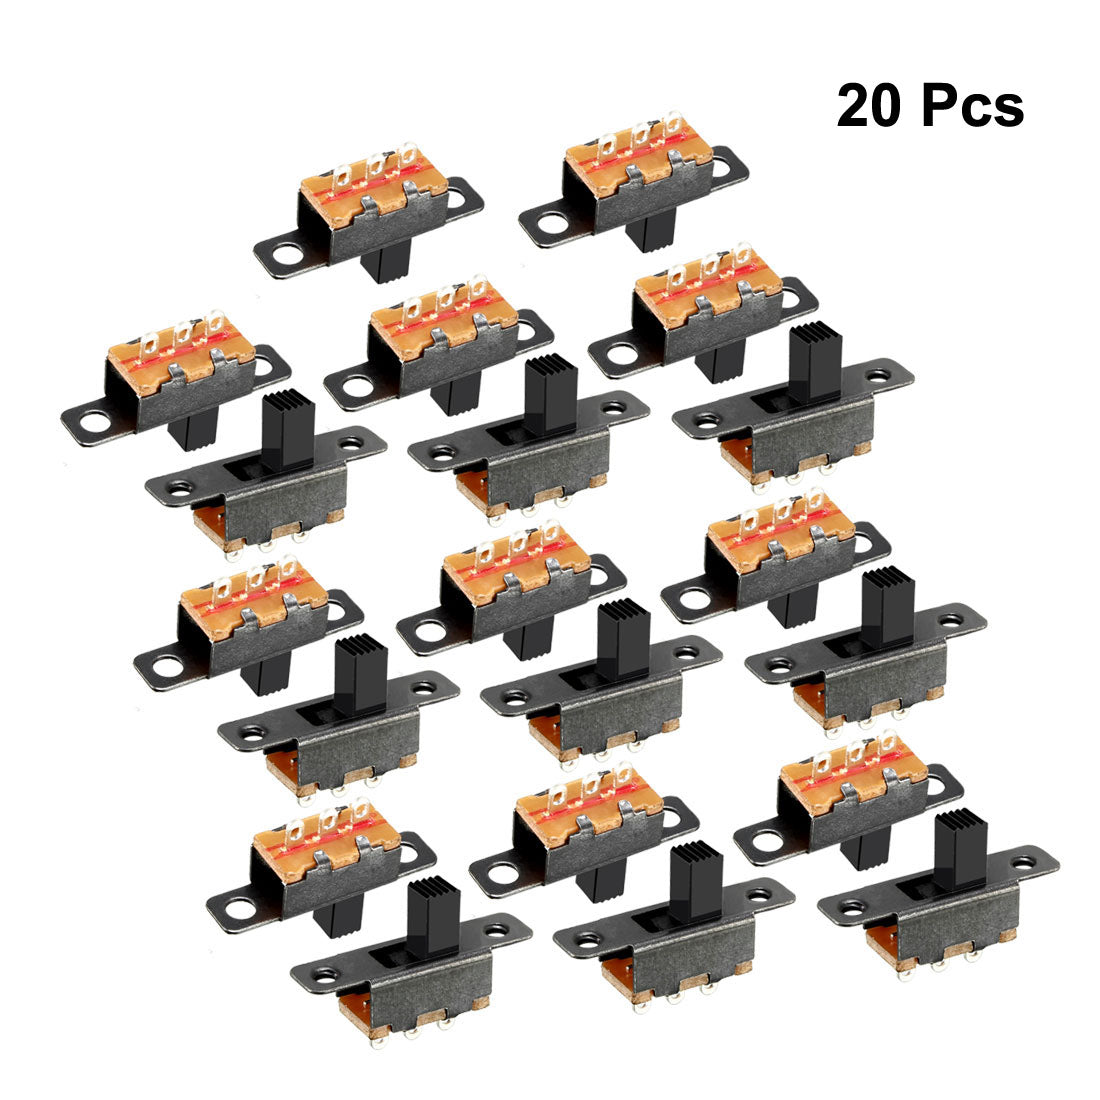 uxcell Uxcell 20Pcs 5mm Vertical Slide Switch SPDT 1P2T 3 Terminals PCB Panel Latching